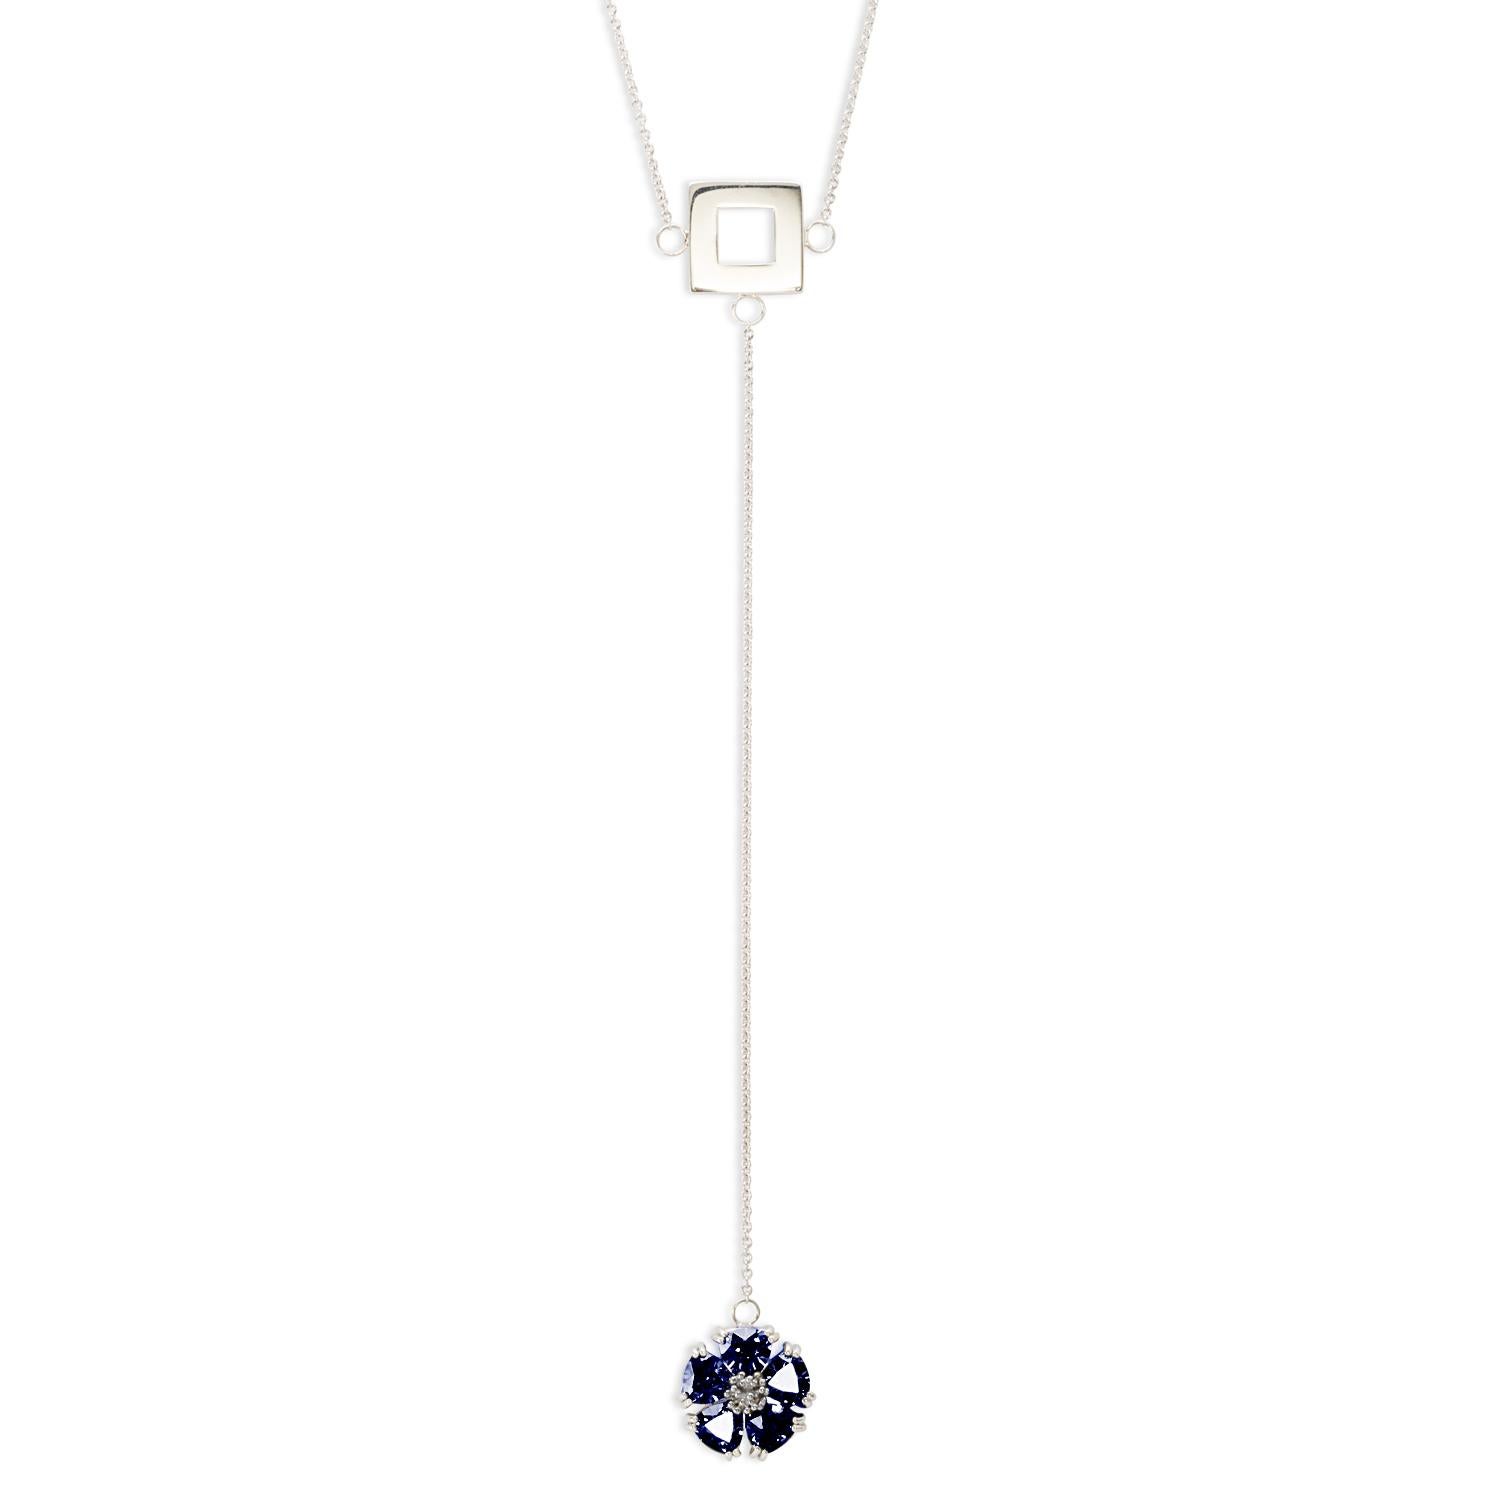 Designed in NYC

.925 Sterling Silver 5 x 7 mm Light Blue Topaz Blossom Stone and Square Lariat Necklace. No matter the season, allow natural beauty to surround you wherever you go. Blossom stone and square lariat necklace: 

Sterling silver